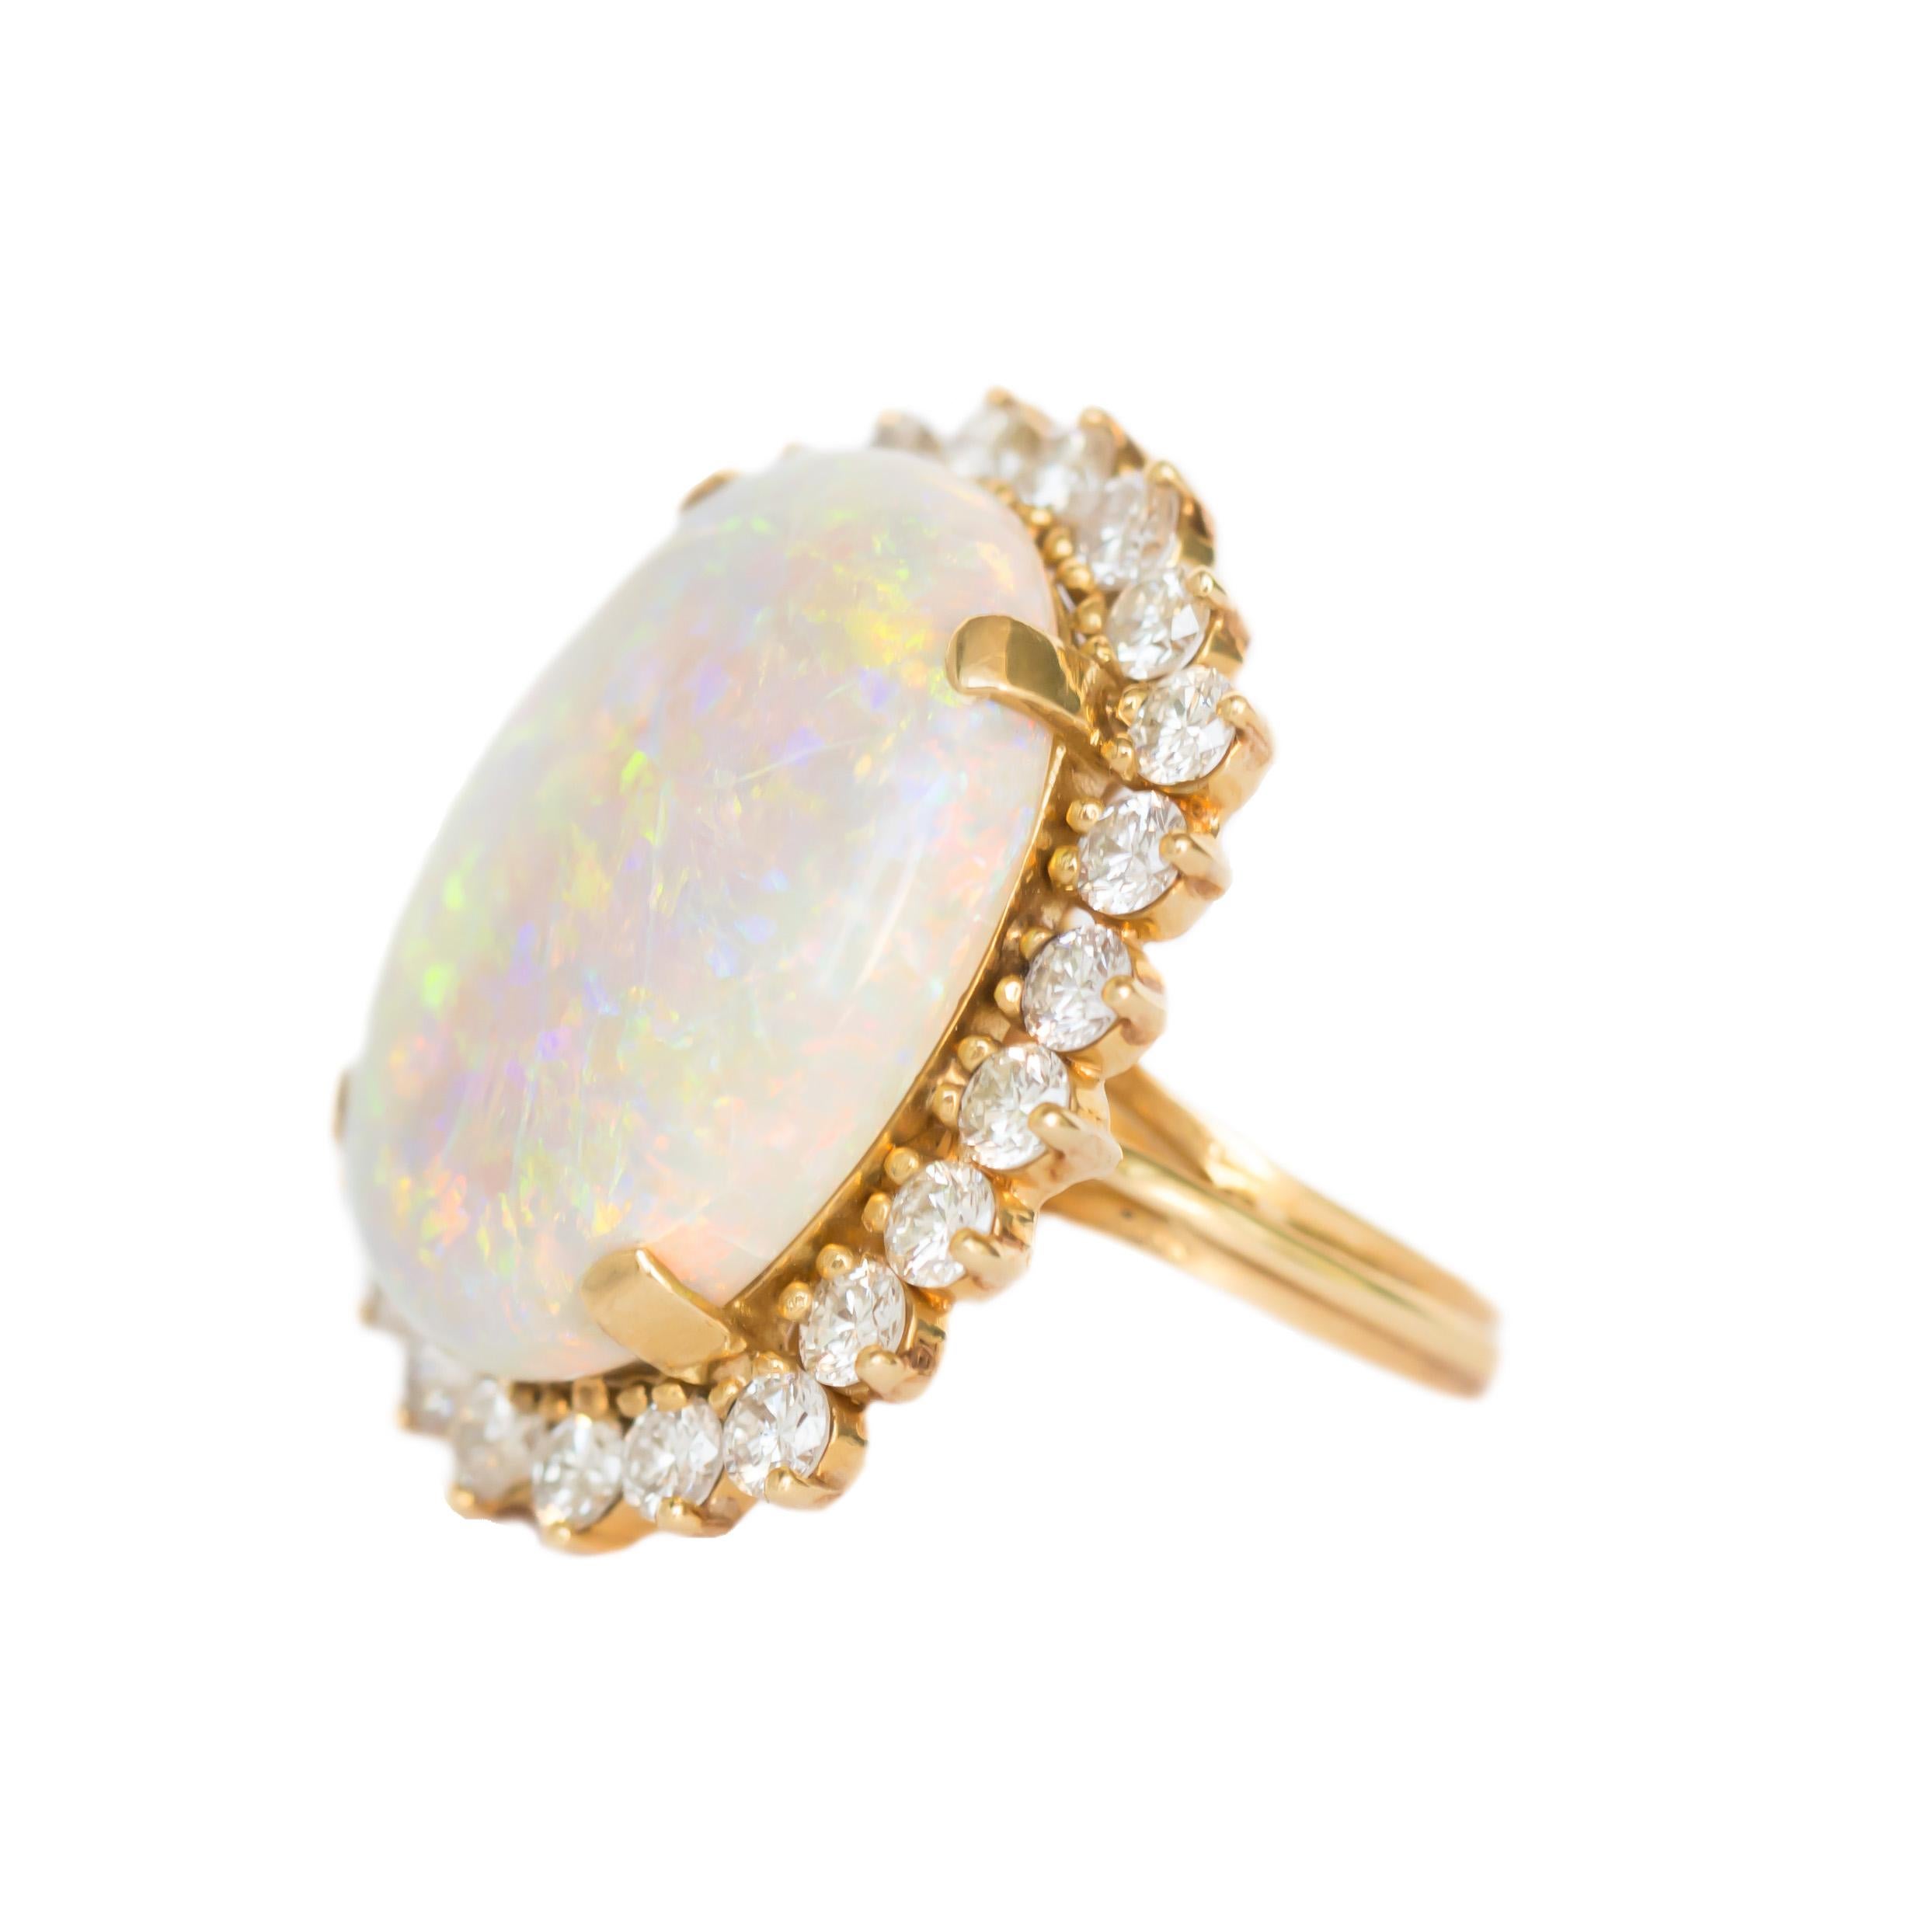 Item Details: 
Ring Size: 6.75
Metal Type: 18K Yellow Gold
Weight: 15.9 grams

Side Stone Details: 
Shape: Round Brilliant
Total Carat Weight: 3.00 carat, total weight
Color: F
Clarity: VS

Color Stone Details: 
Type: Opal
Shape: Oval Shape
Carat